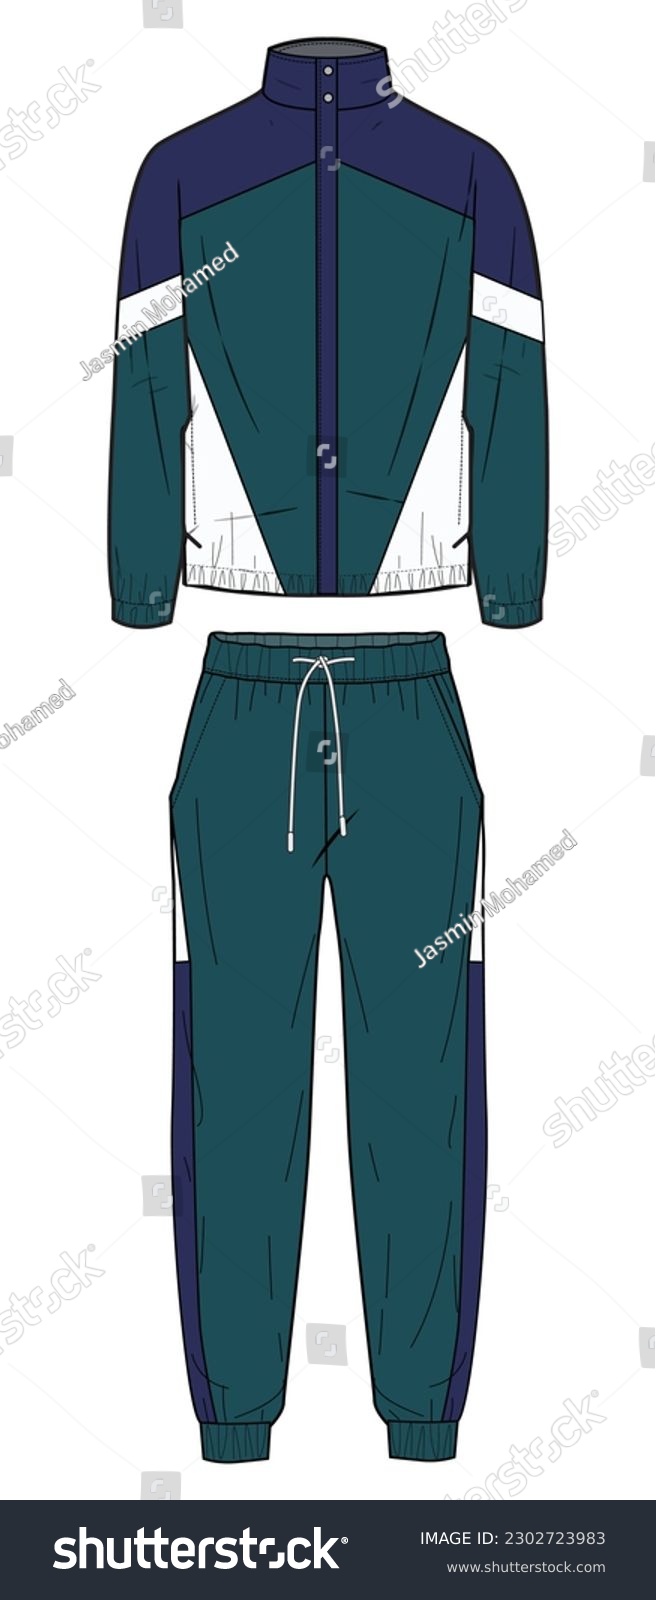 SVG of Tracksuit Fashion Illustration, Vector, CAD, Technical Drawing, Flat Drawing, Template, Mockup.	 svg